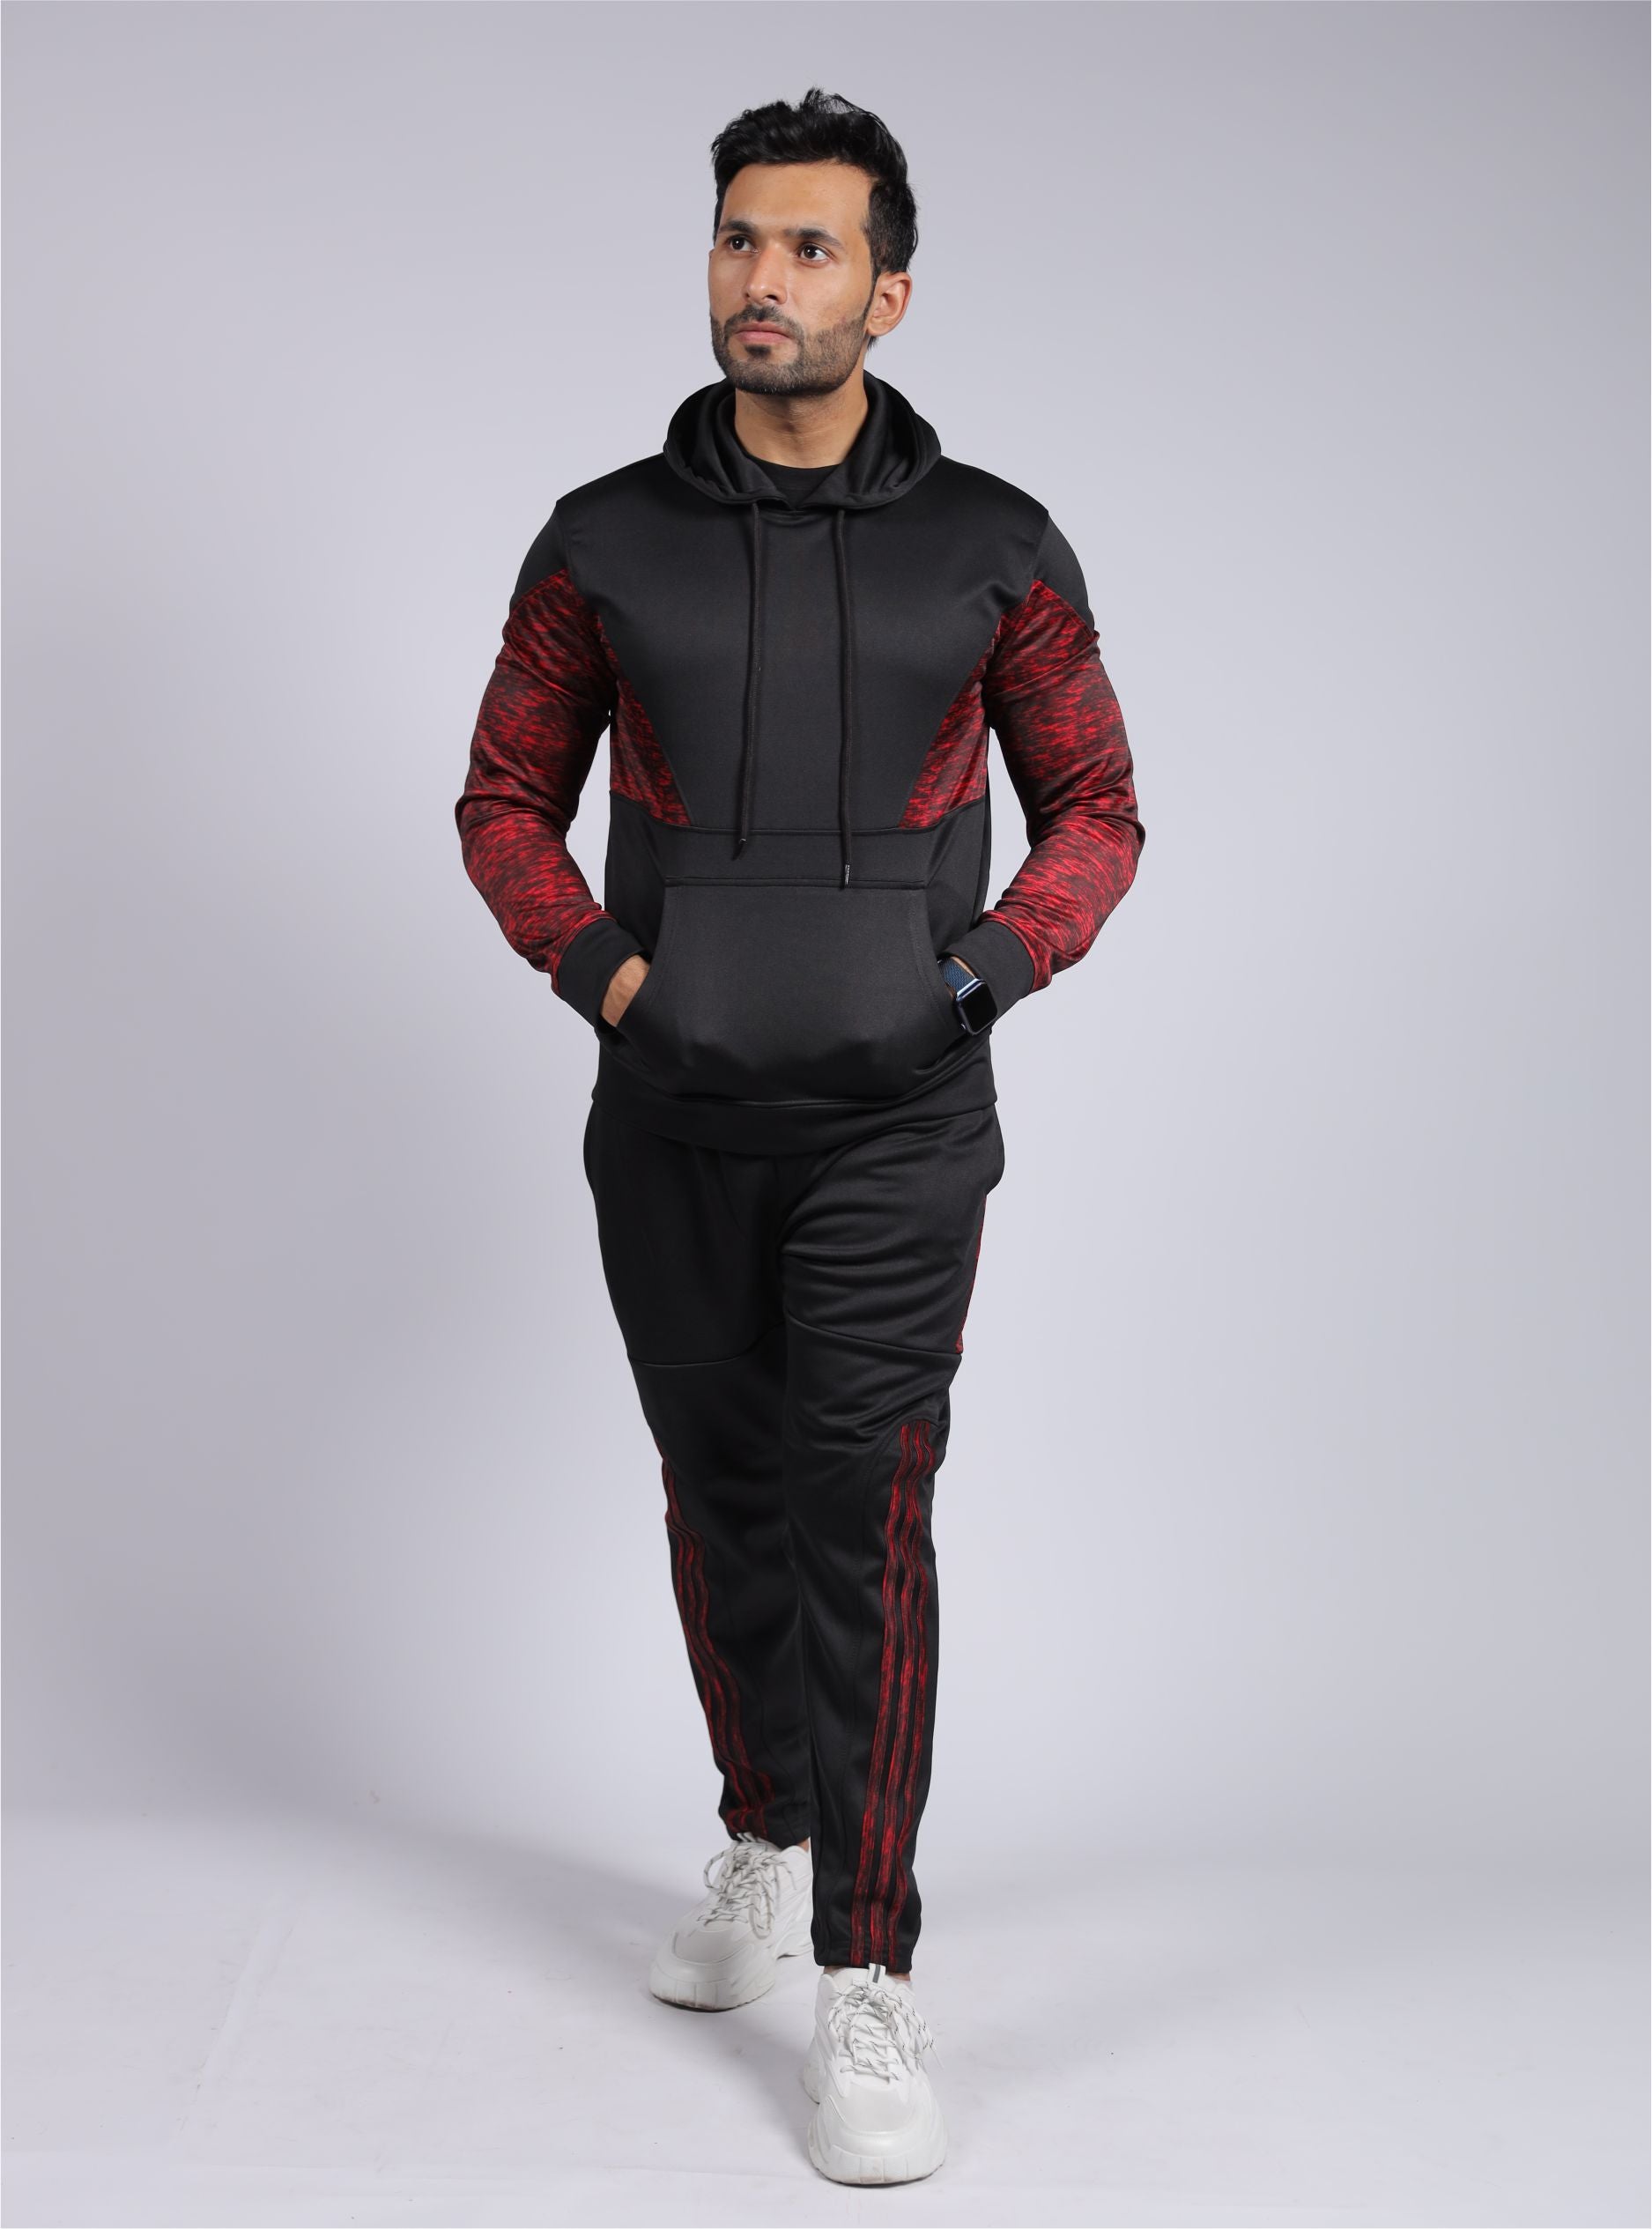 Buy online Mens winter tracksuits in Pakistan, best quality tracksuit pakistan,